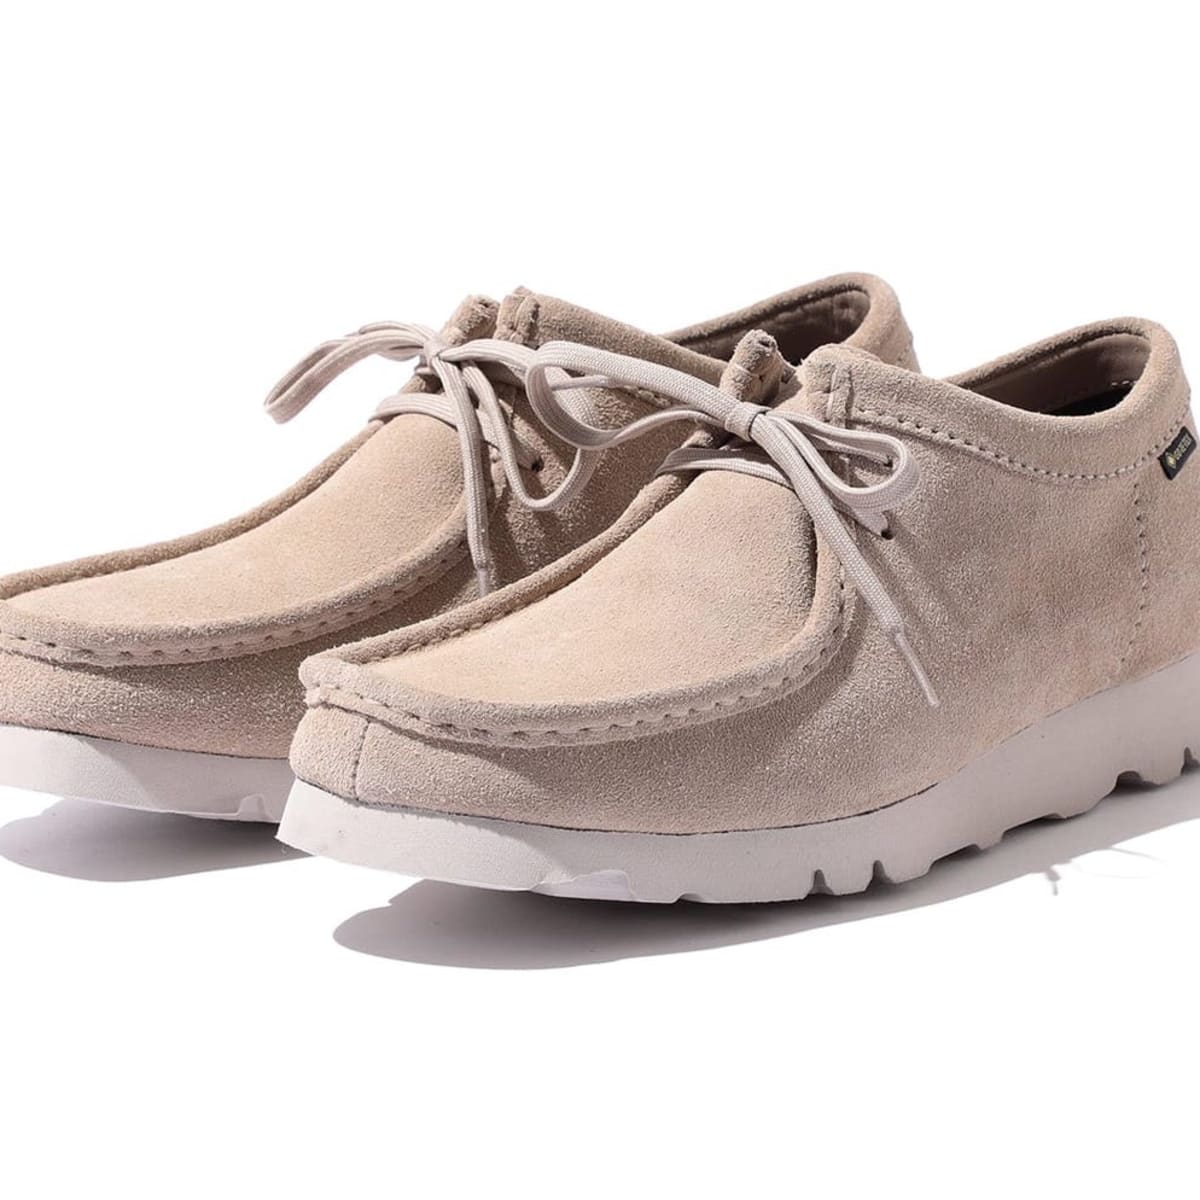 Beams upgrades the Wallabee with Gore-Tex and rugged Vibram soles 